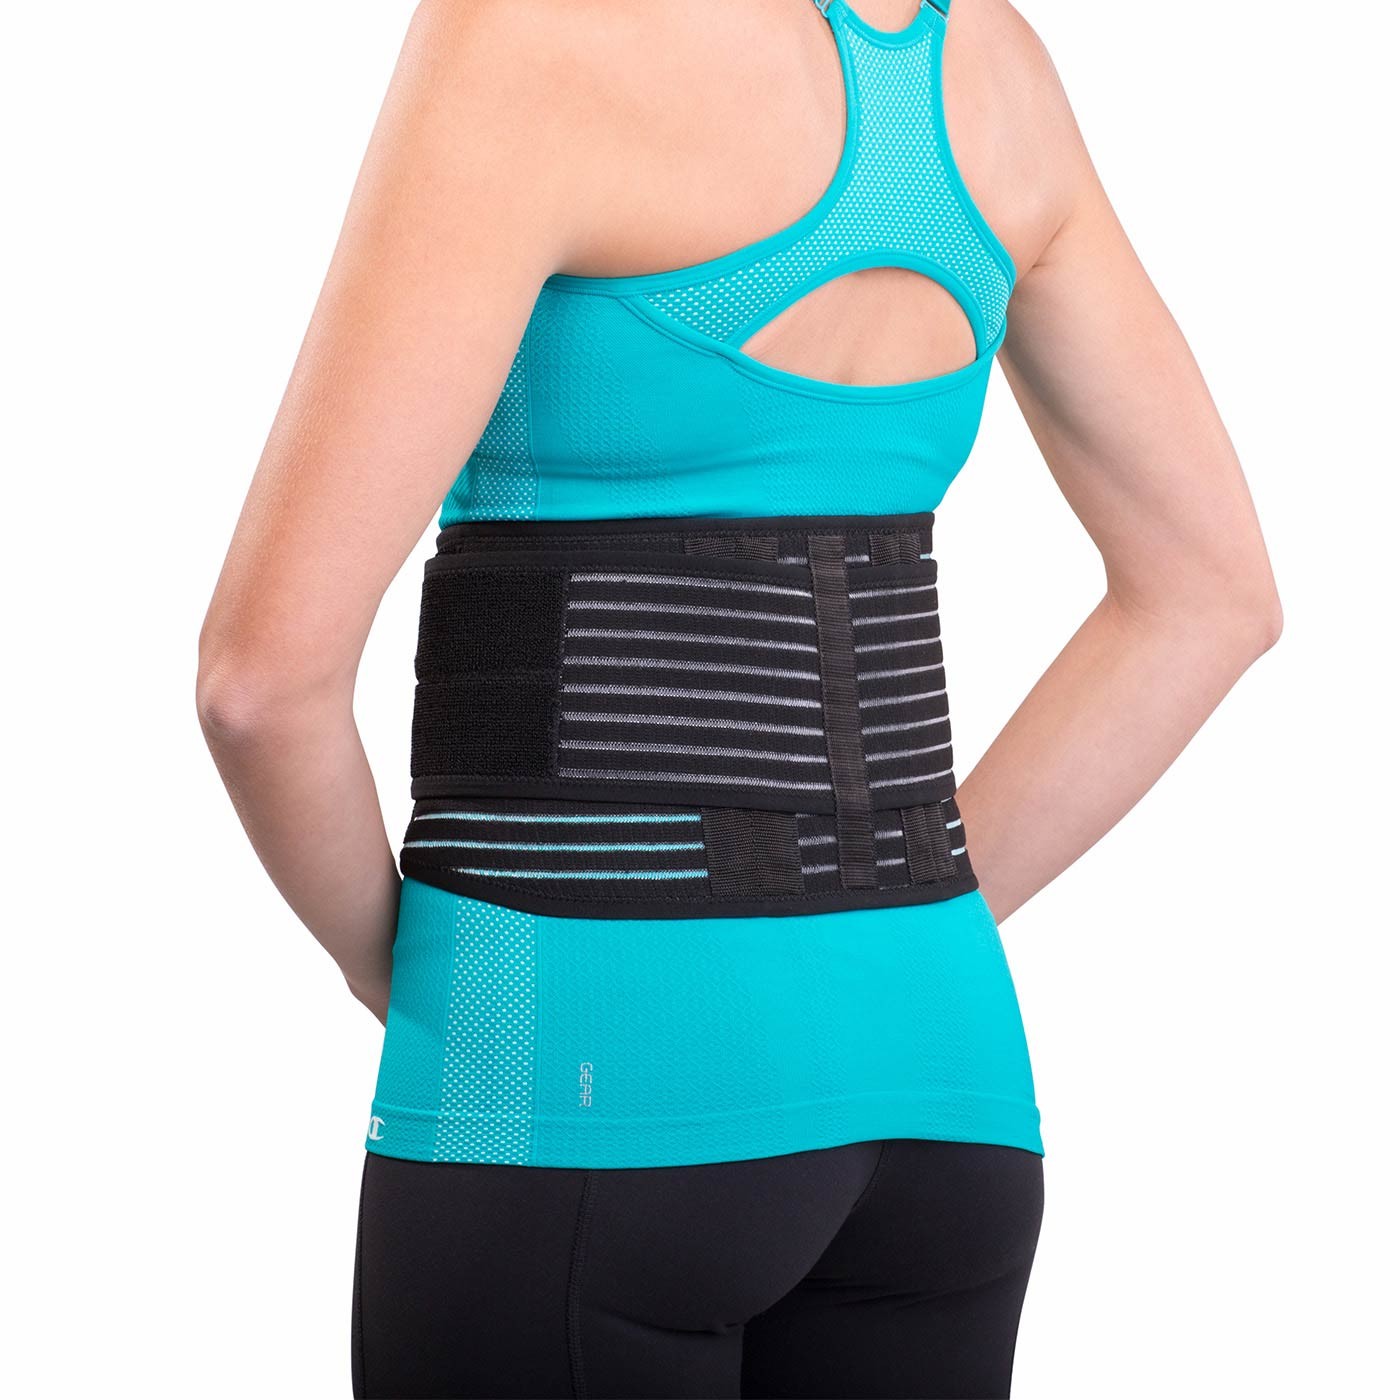 The DonJoy Advantage Stabilizing Back Support is a low-profile back brace to help relieve low-back pain. Adjustable for a personalized fit.